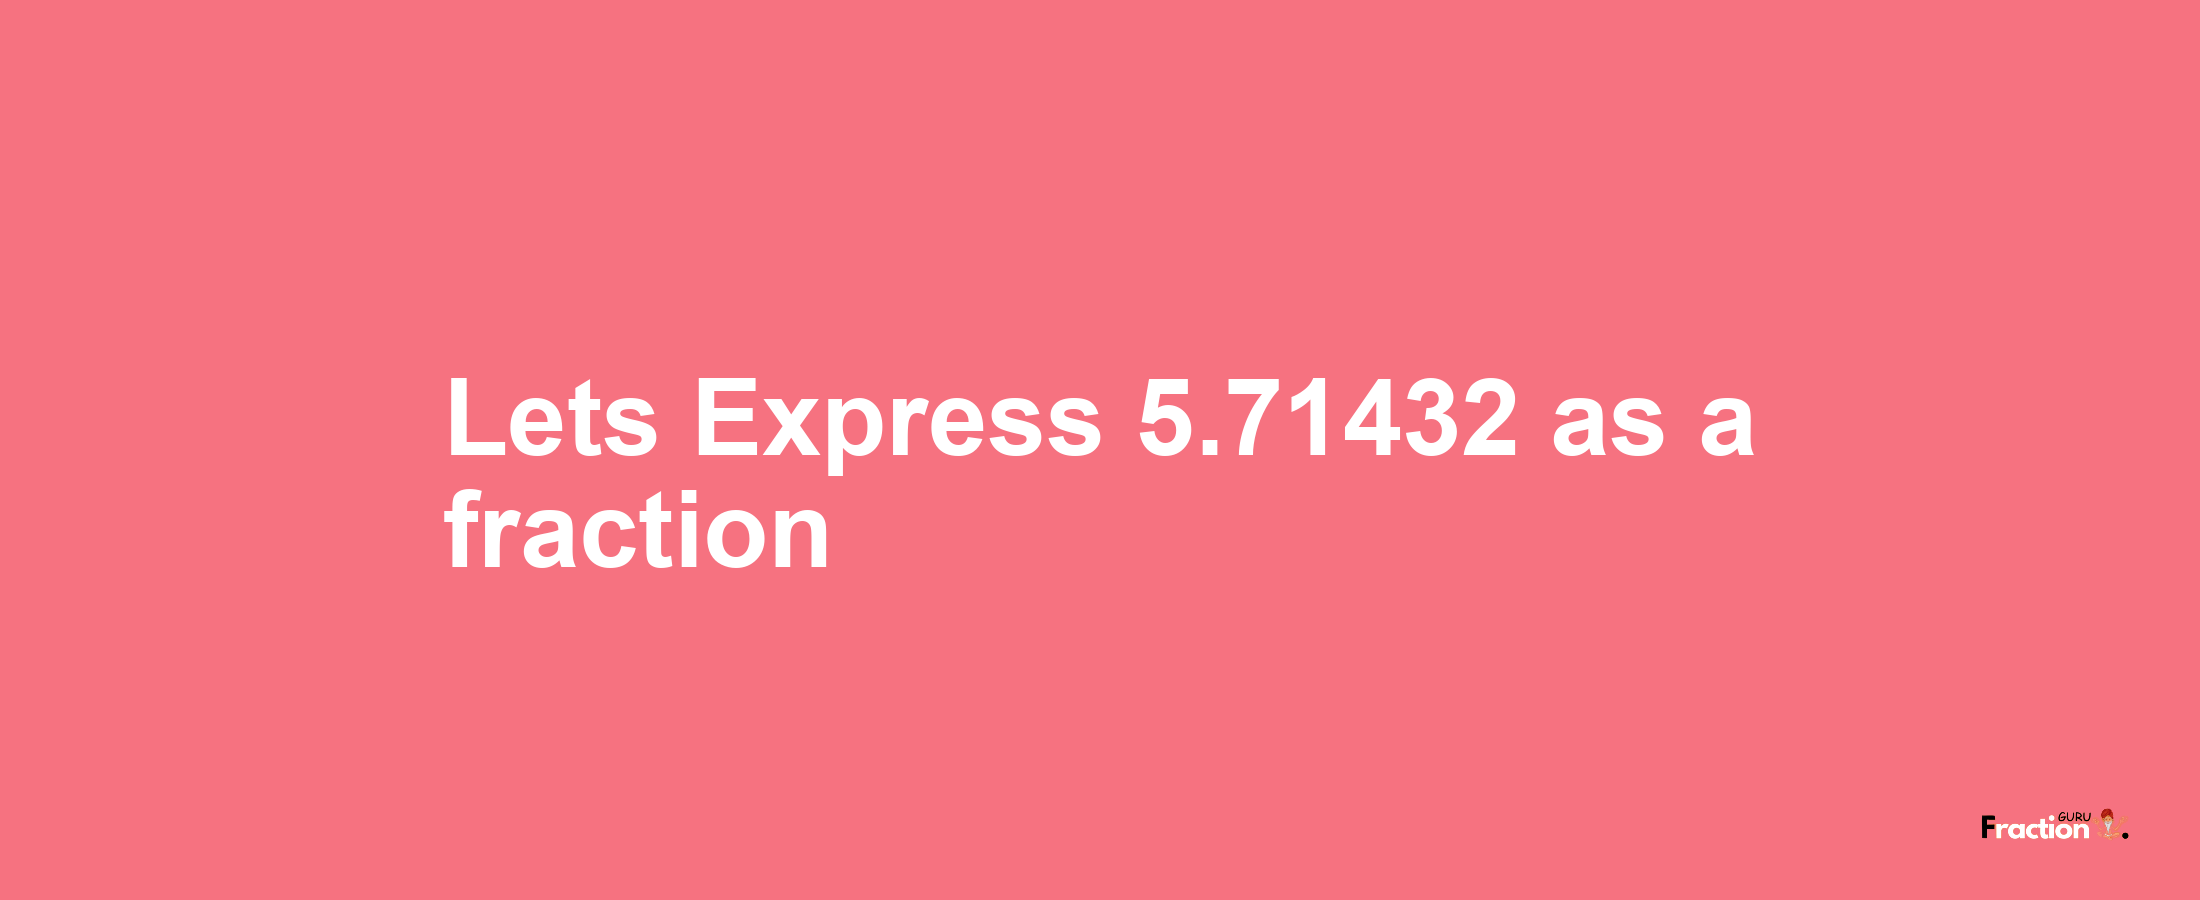 Lets Express 5.71432 as afraction